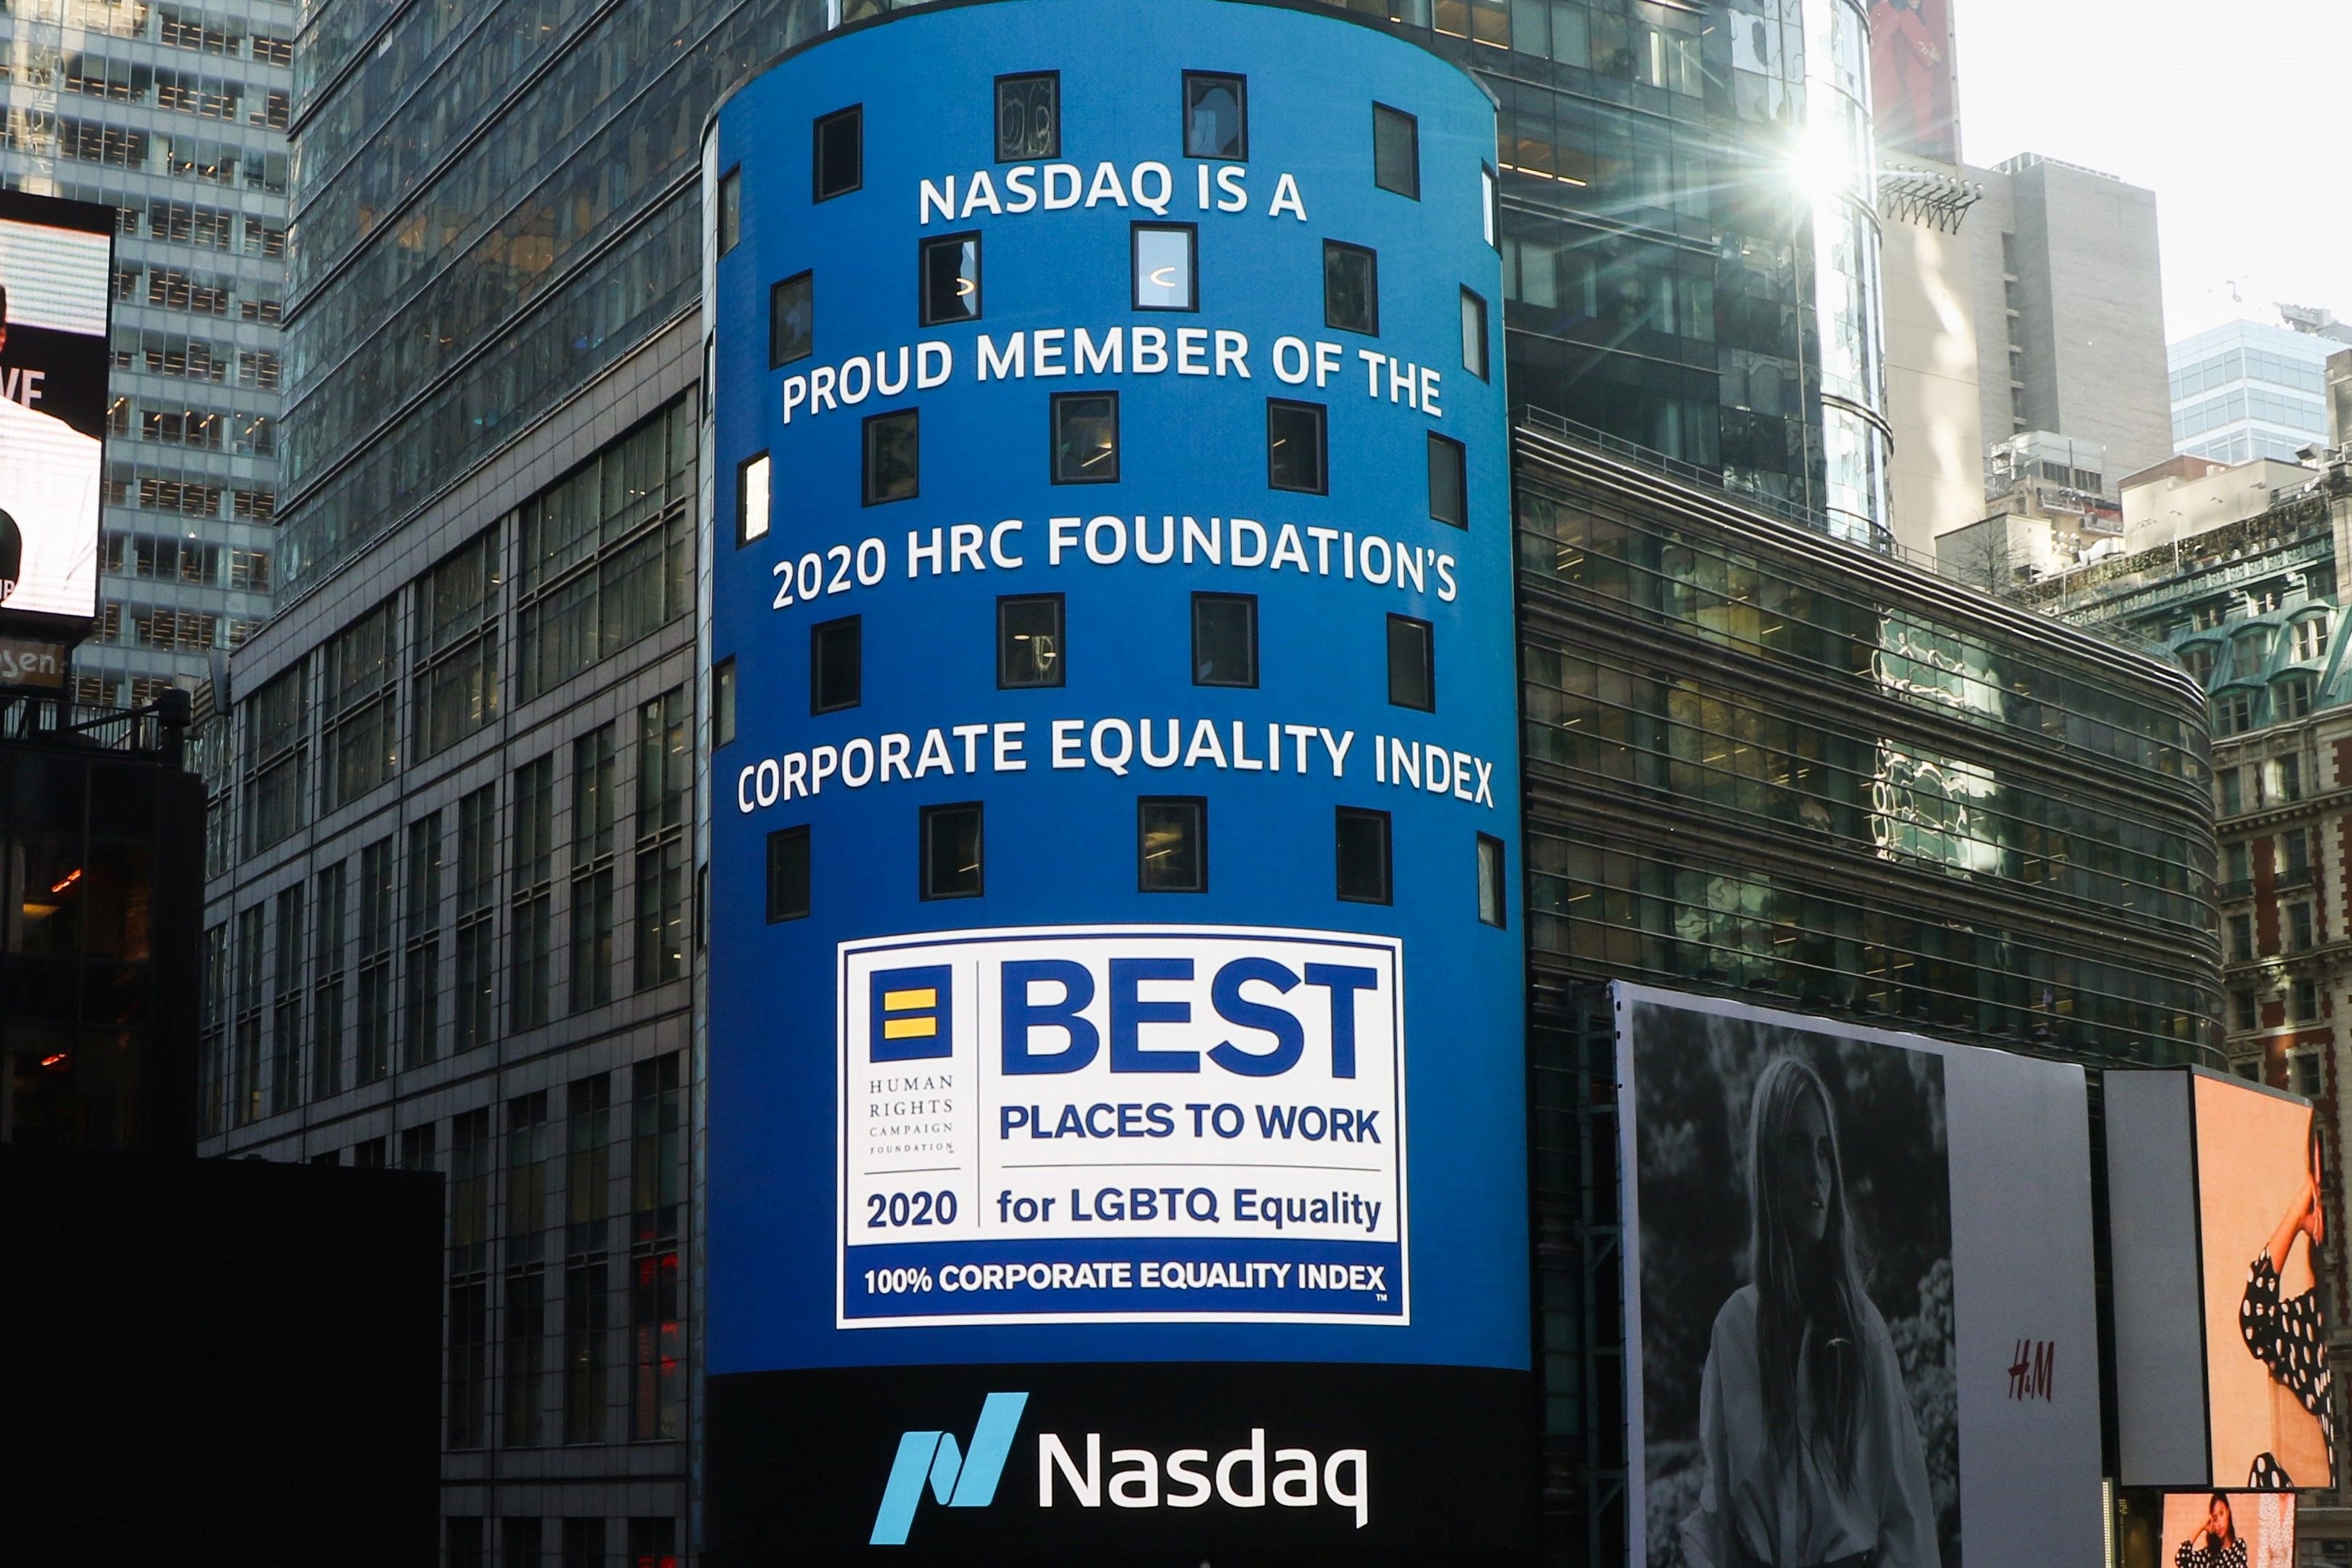 Nasdaq Recognized as a “Best Place to Work for LGBTQ Equality” for the Second Consecutive Year